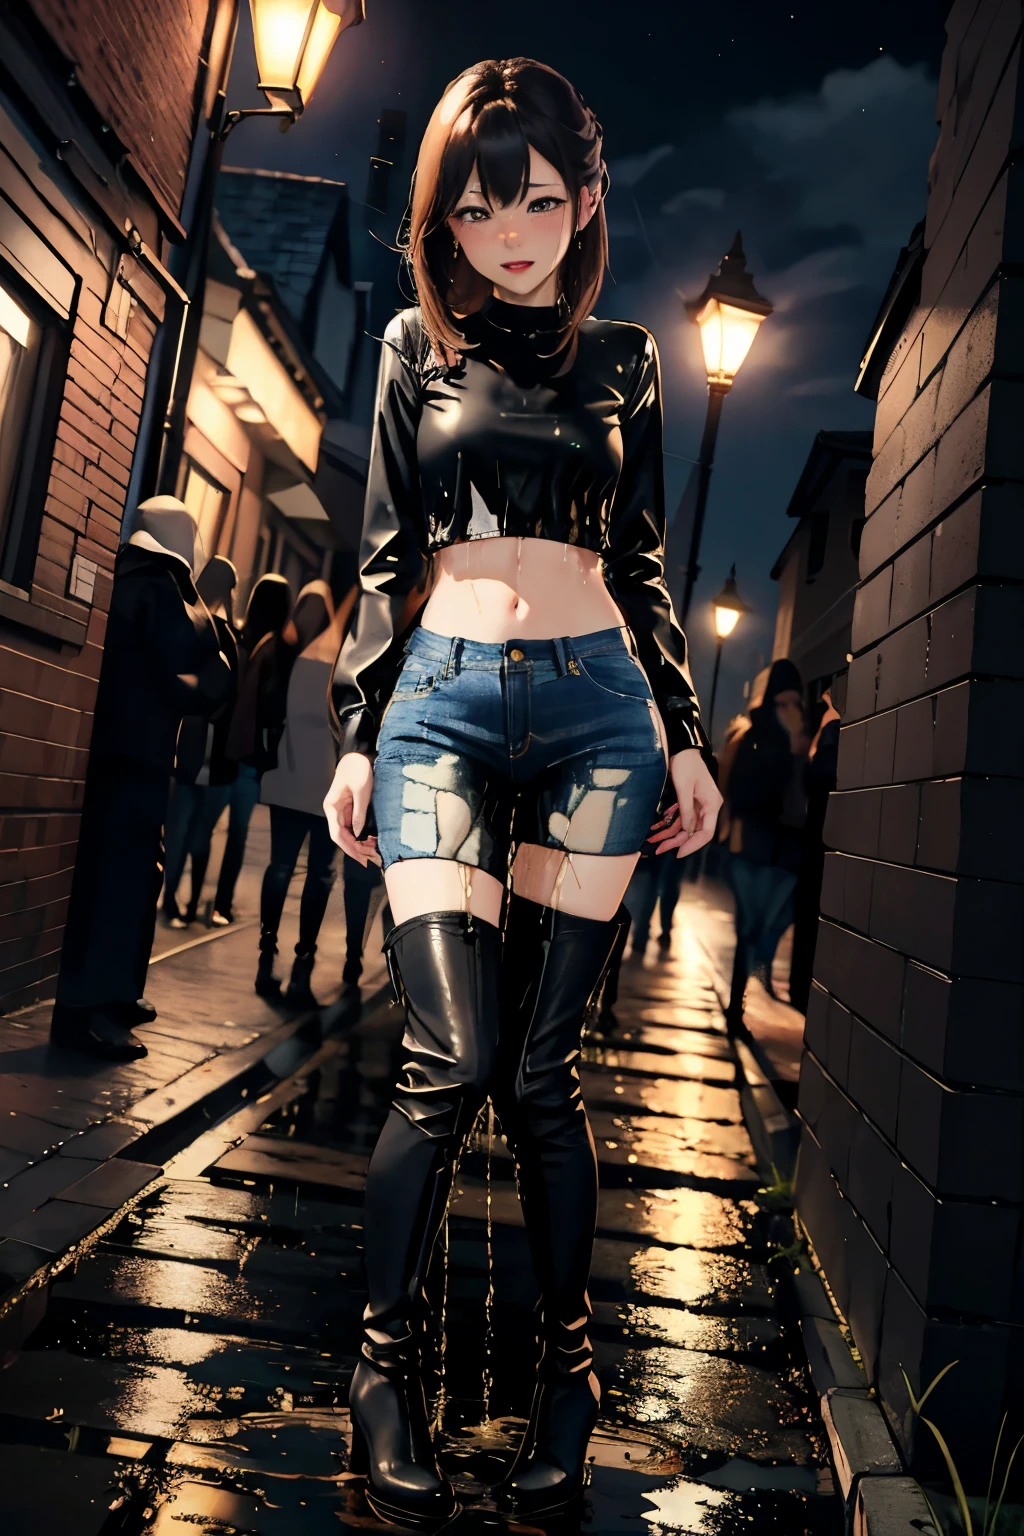 highres, beautiful women, high detail, good lighting, lewd, hentai, (no nudity), (((jeans))), ((tight leather top)), (((leather thigh high boots))), bare midriff, ((wet crotch)), (((peeing herself))), (((wetting herself))), pee streaming down legs, peeing stain, (puddle), (thick thighs), nice long legs, lipstick, detailed face, pretty face, embarrassed blushing face, humiliated, ((legs spread)), ((standing under streetlight at night)), hihelz